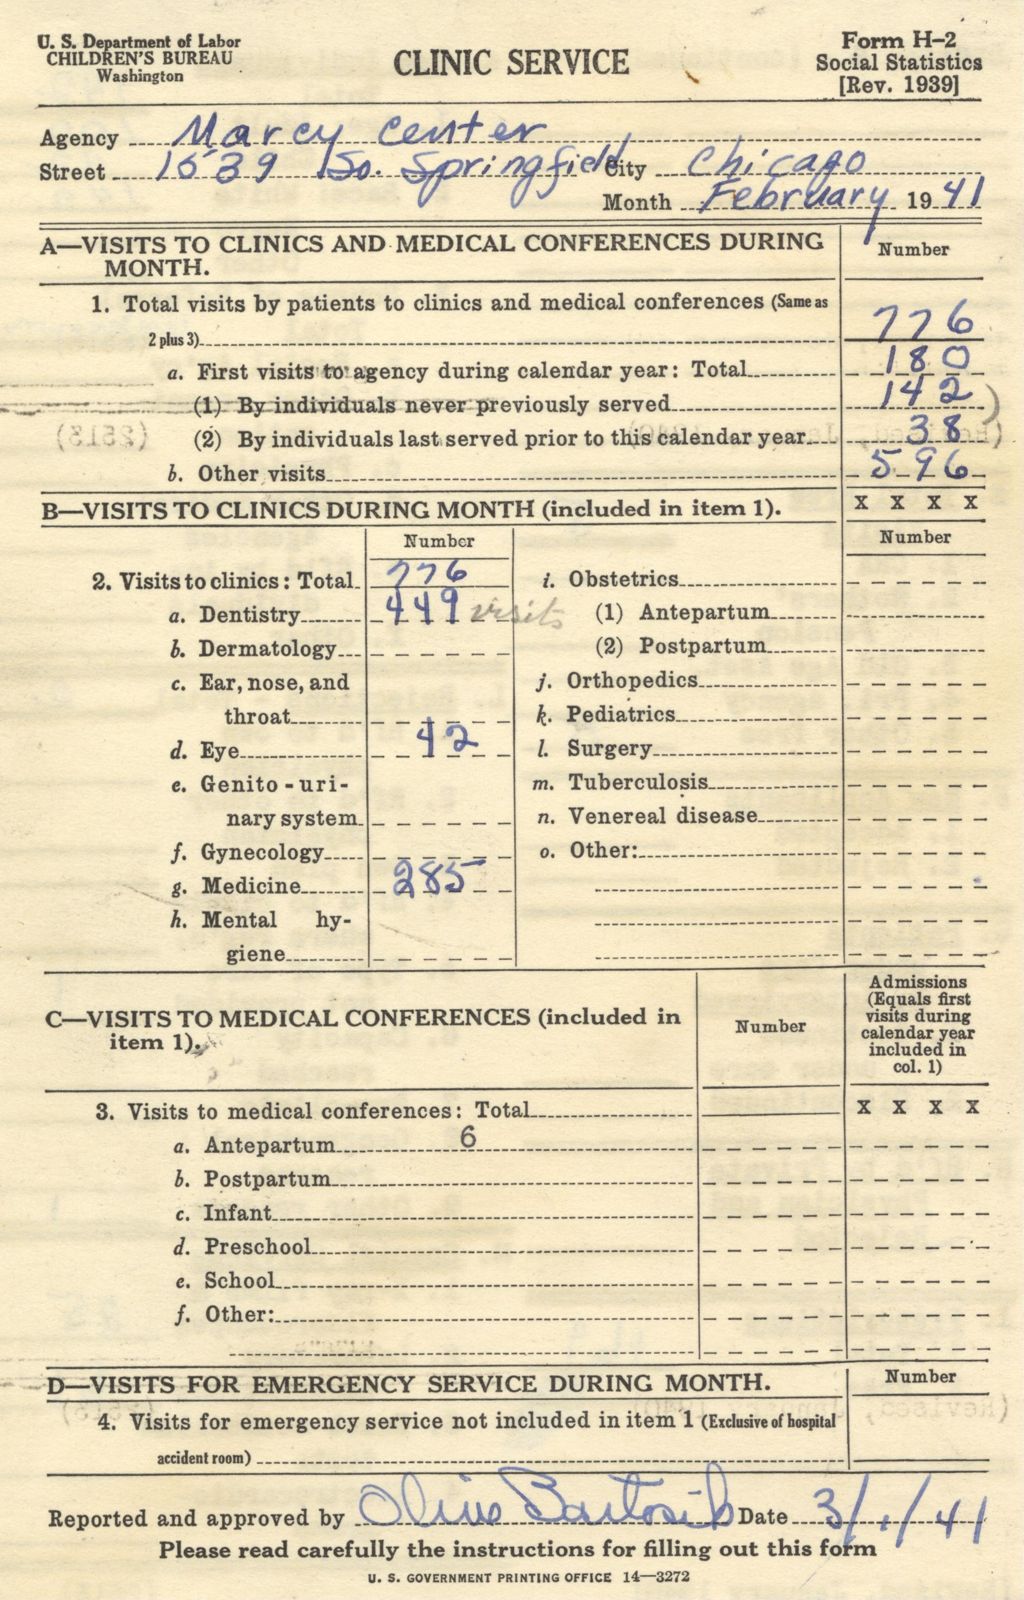 Marcy Center Clinic Service form for February 1941